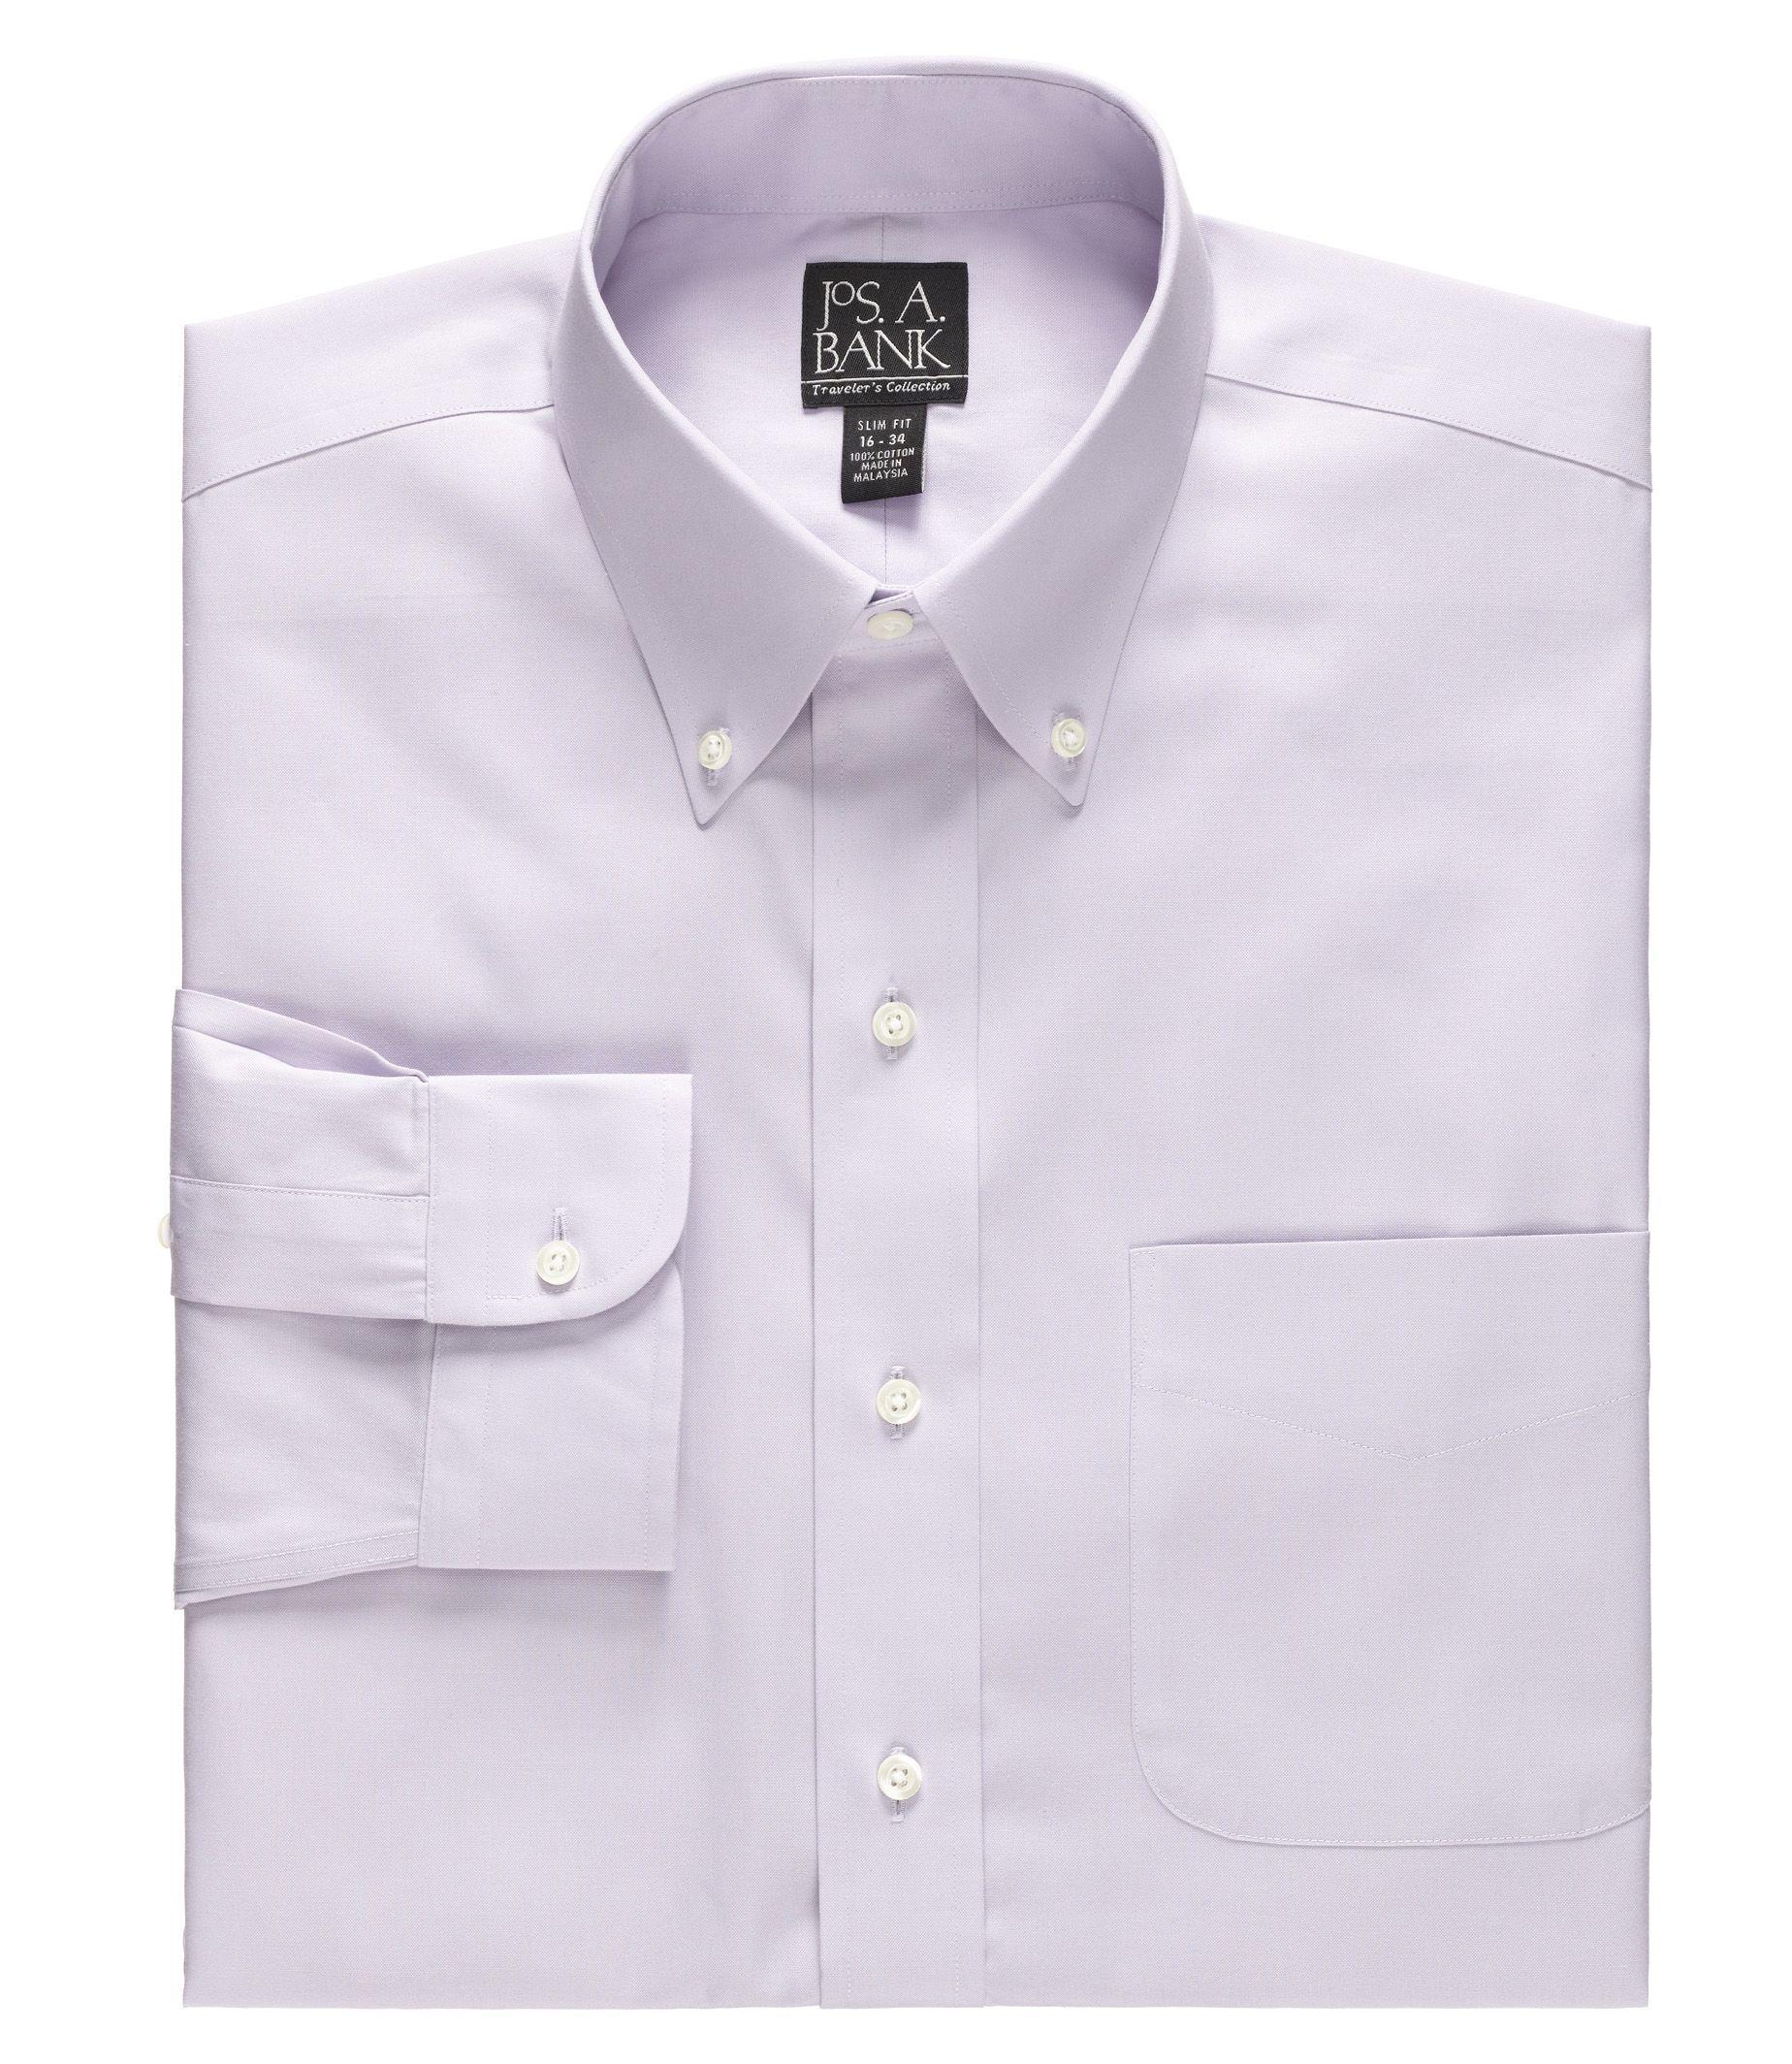 Lyst - Jos. A. Bank Traveler Collection Slim Fit Button-down Collar ...